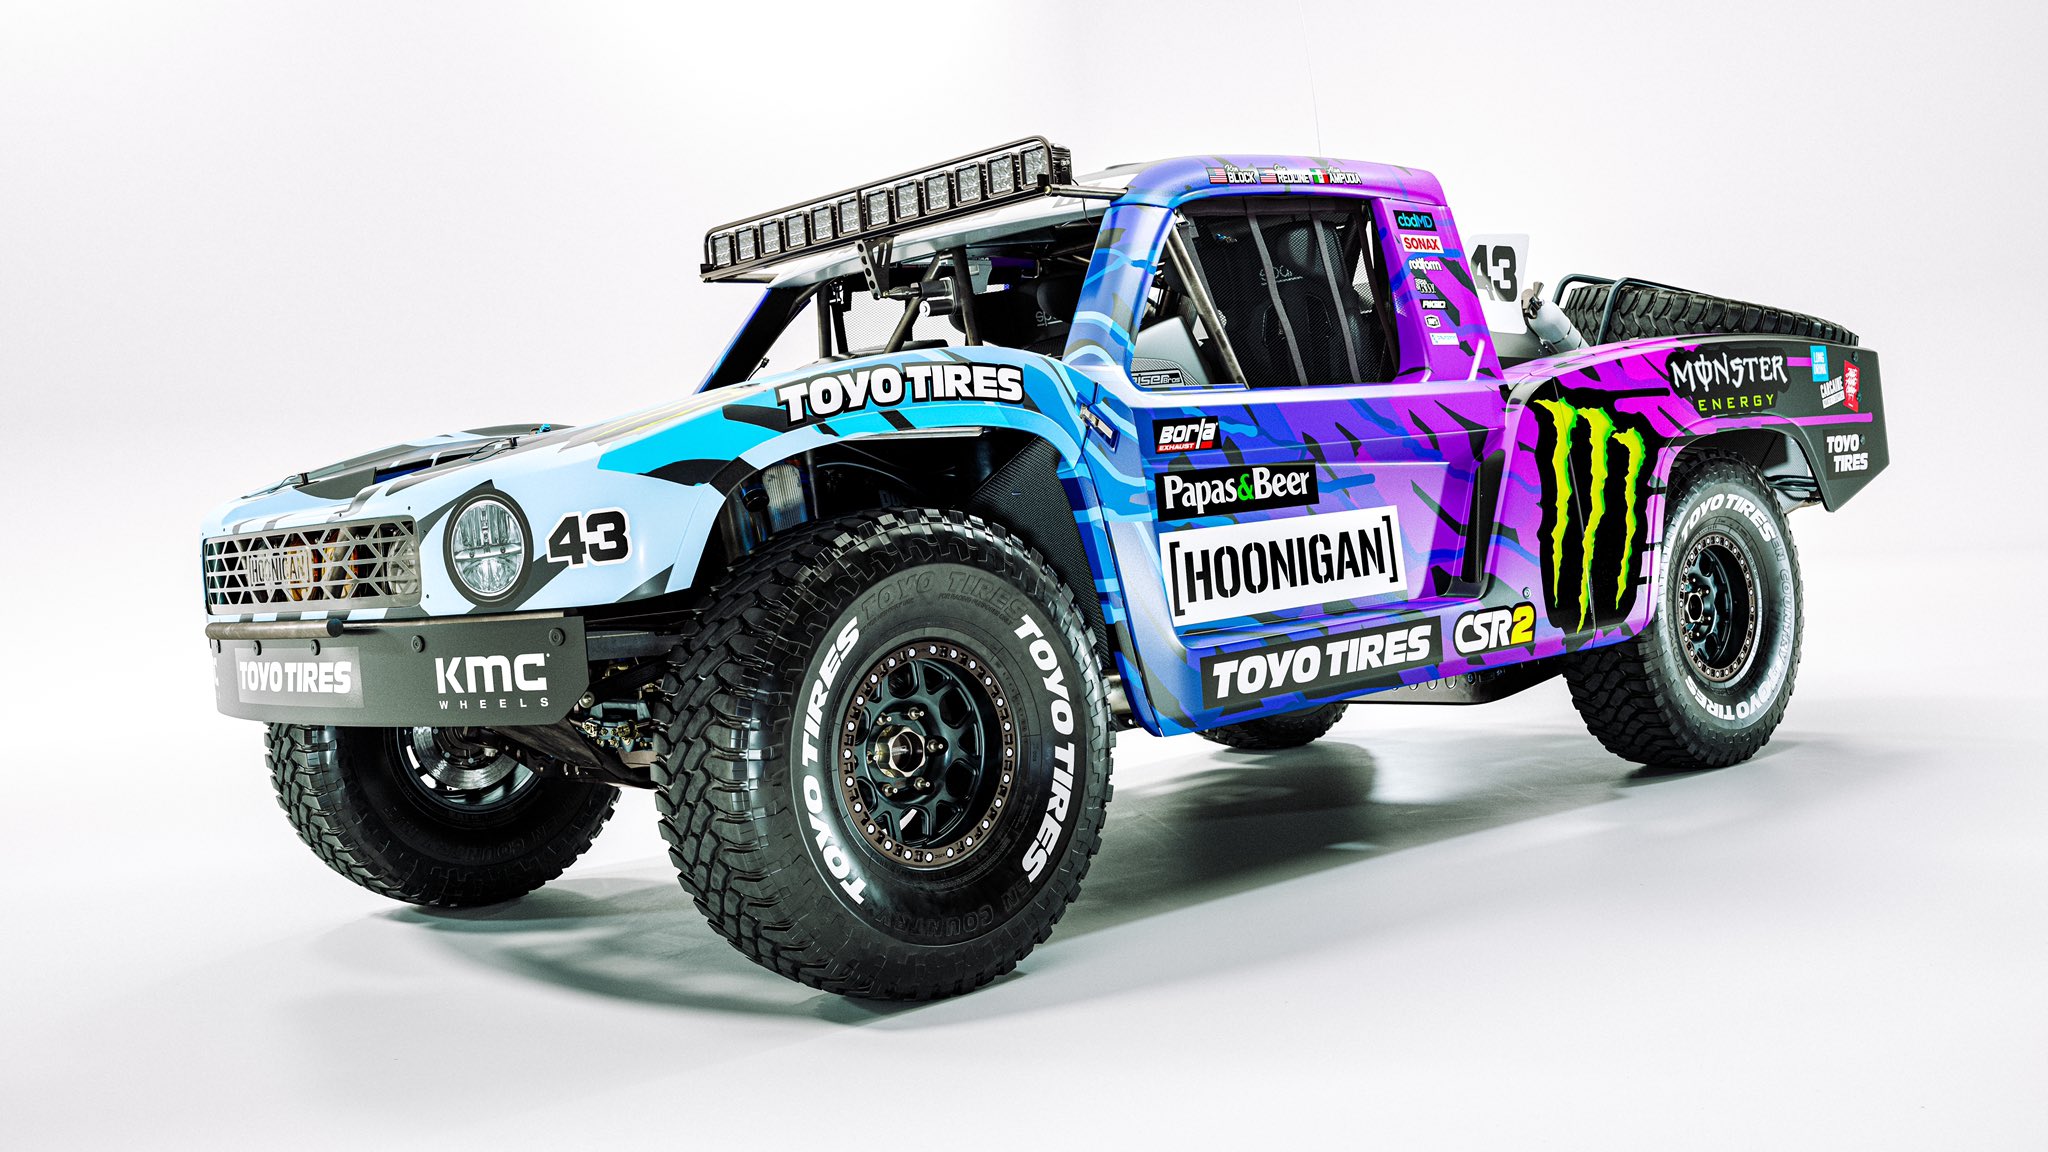 Ken Block al Twitter: Here it is!! It's wild to see my 2021 “It's A Living” livery on the new Trophy Truck (built by Geiser Bros) that I will be racing the